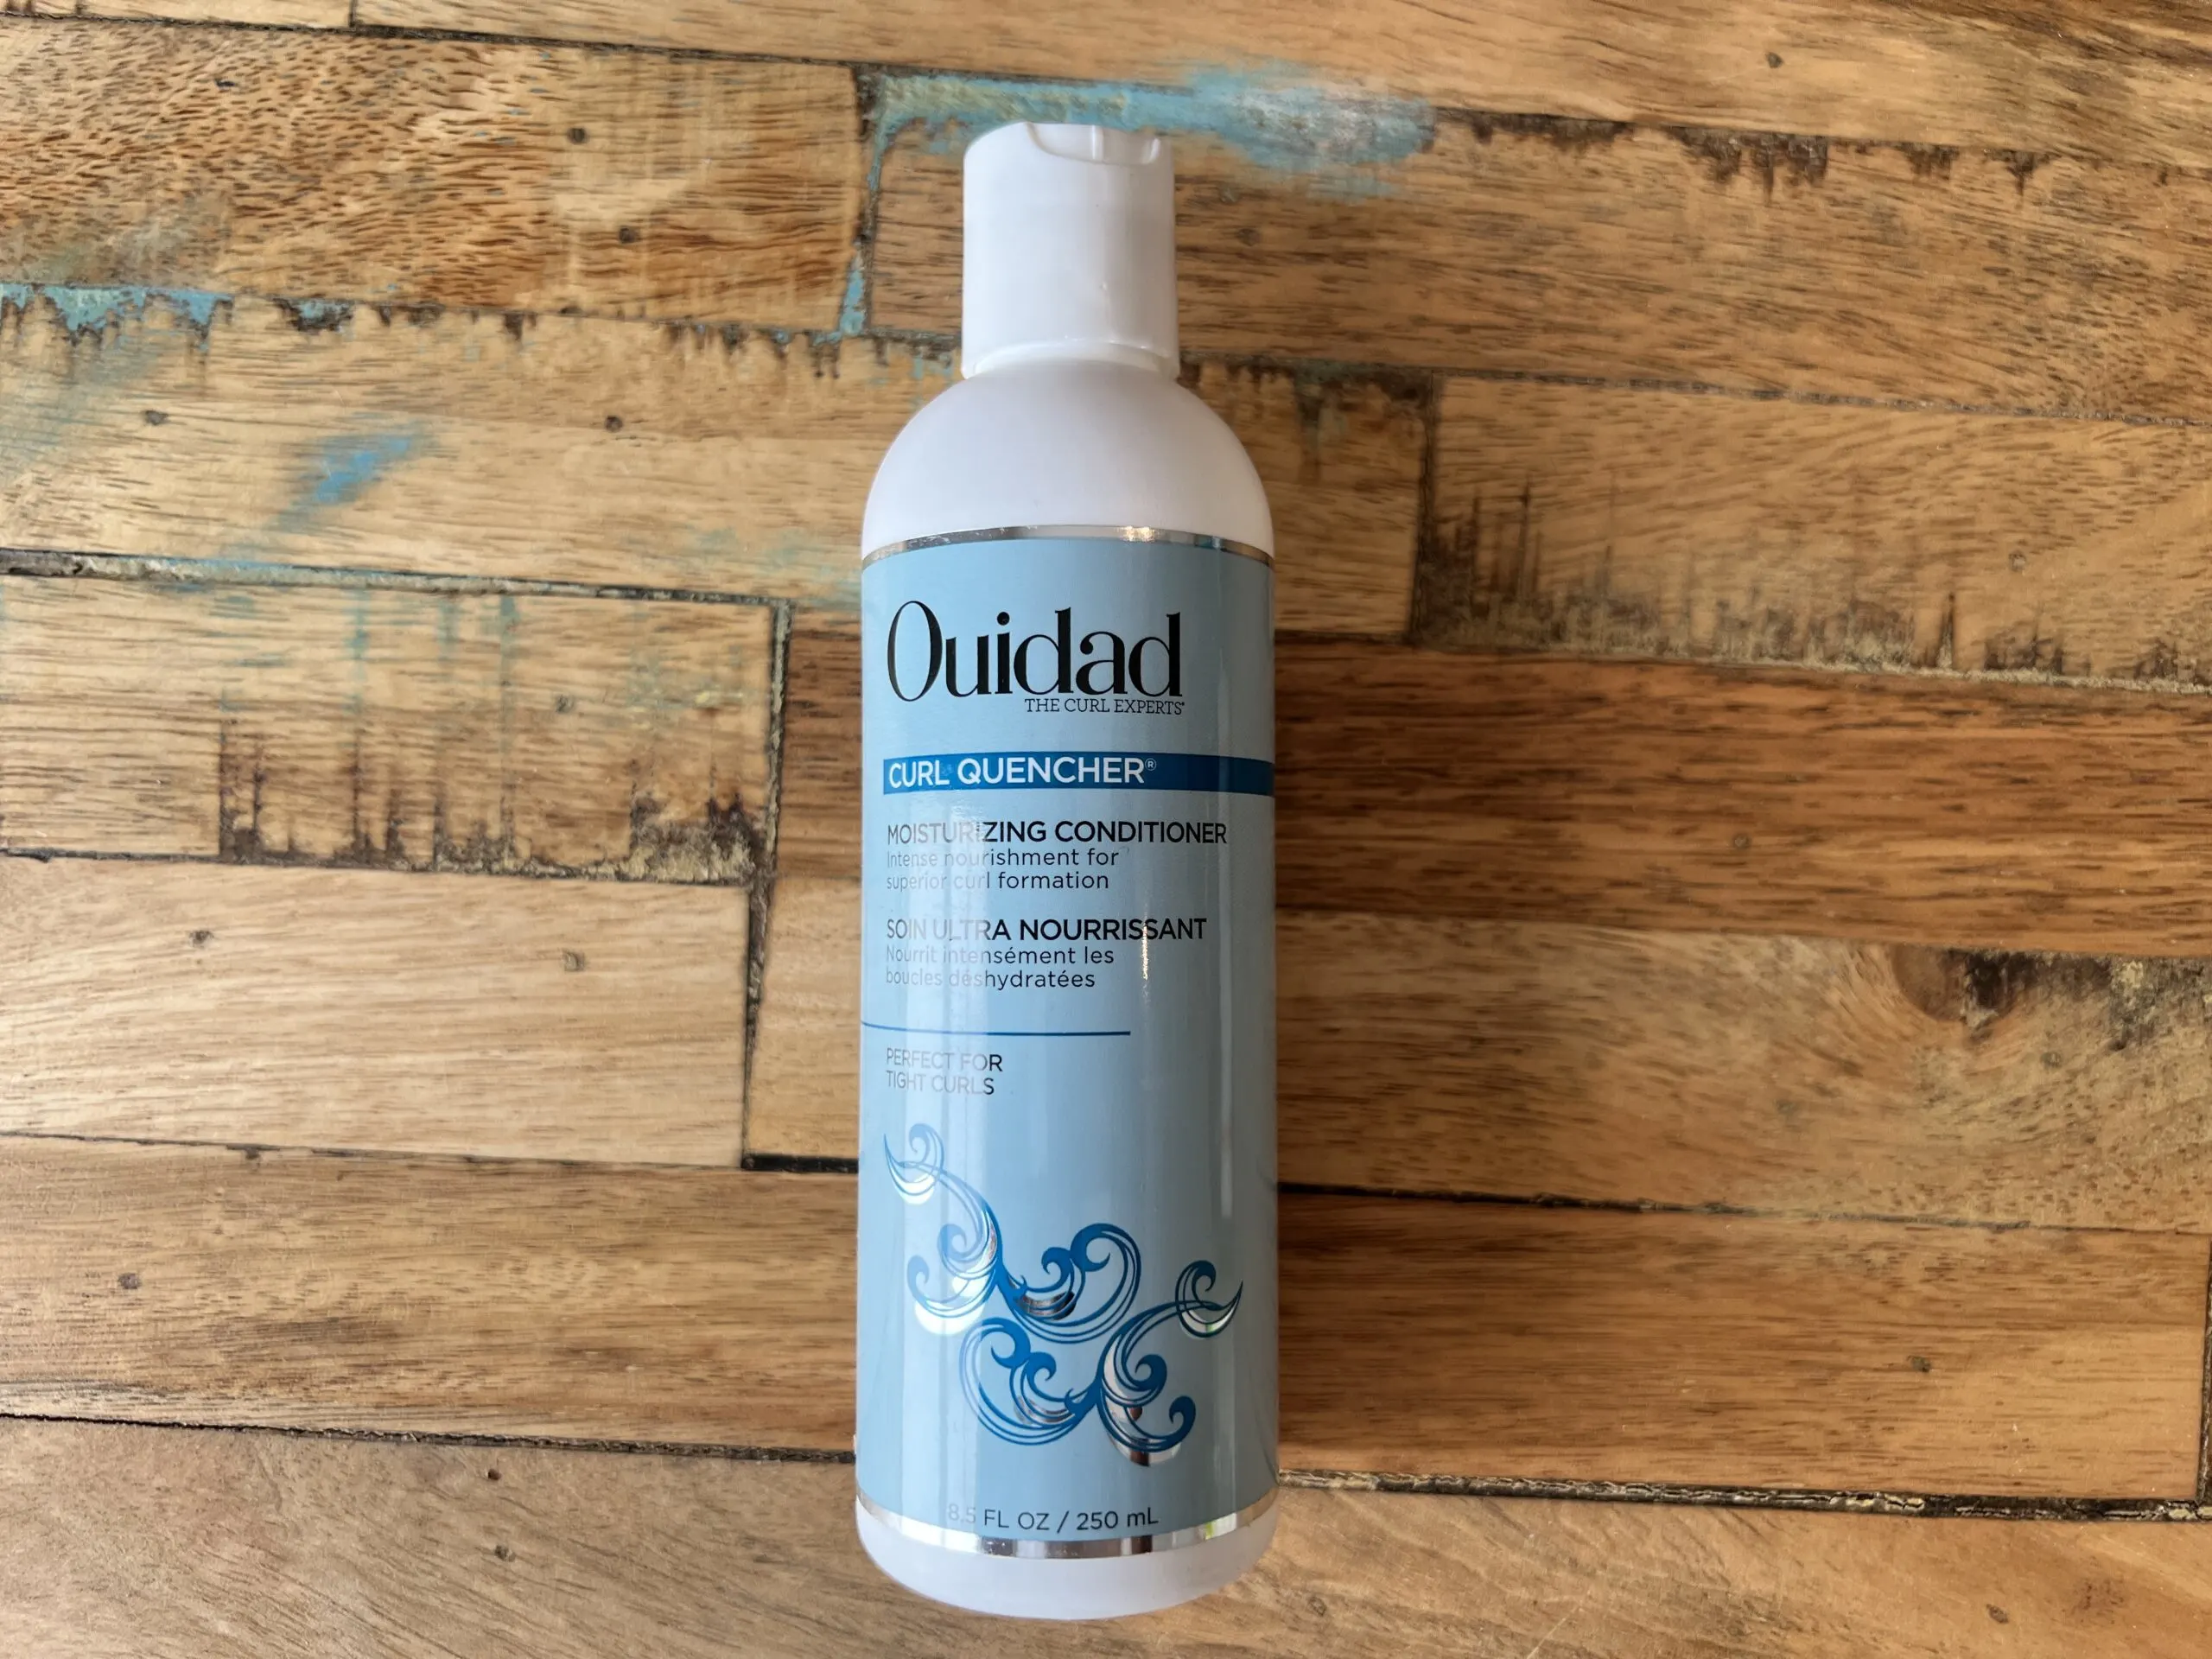 Ouidad: The Curly Expert - Curl Quencher moisturizing conditioner for intense nourishment for superior curl formation.